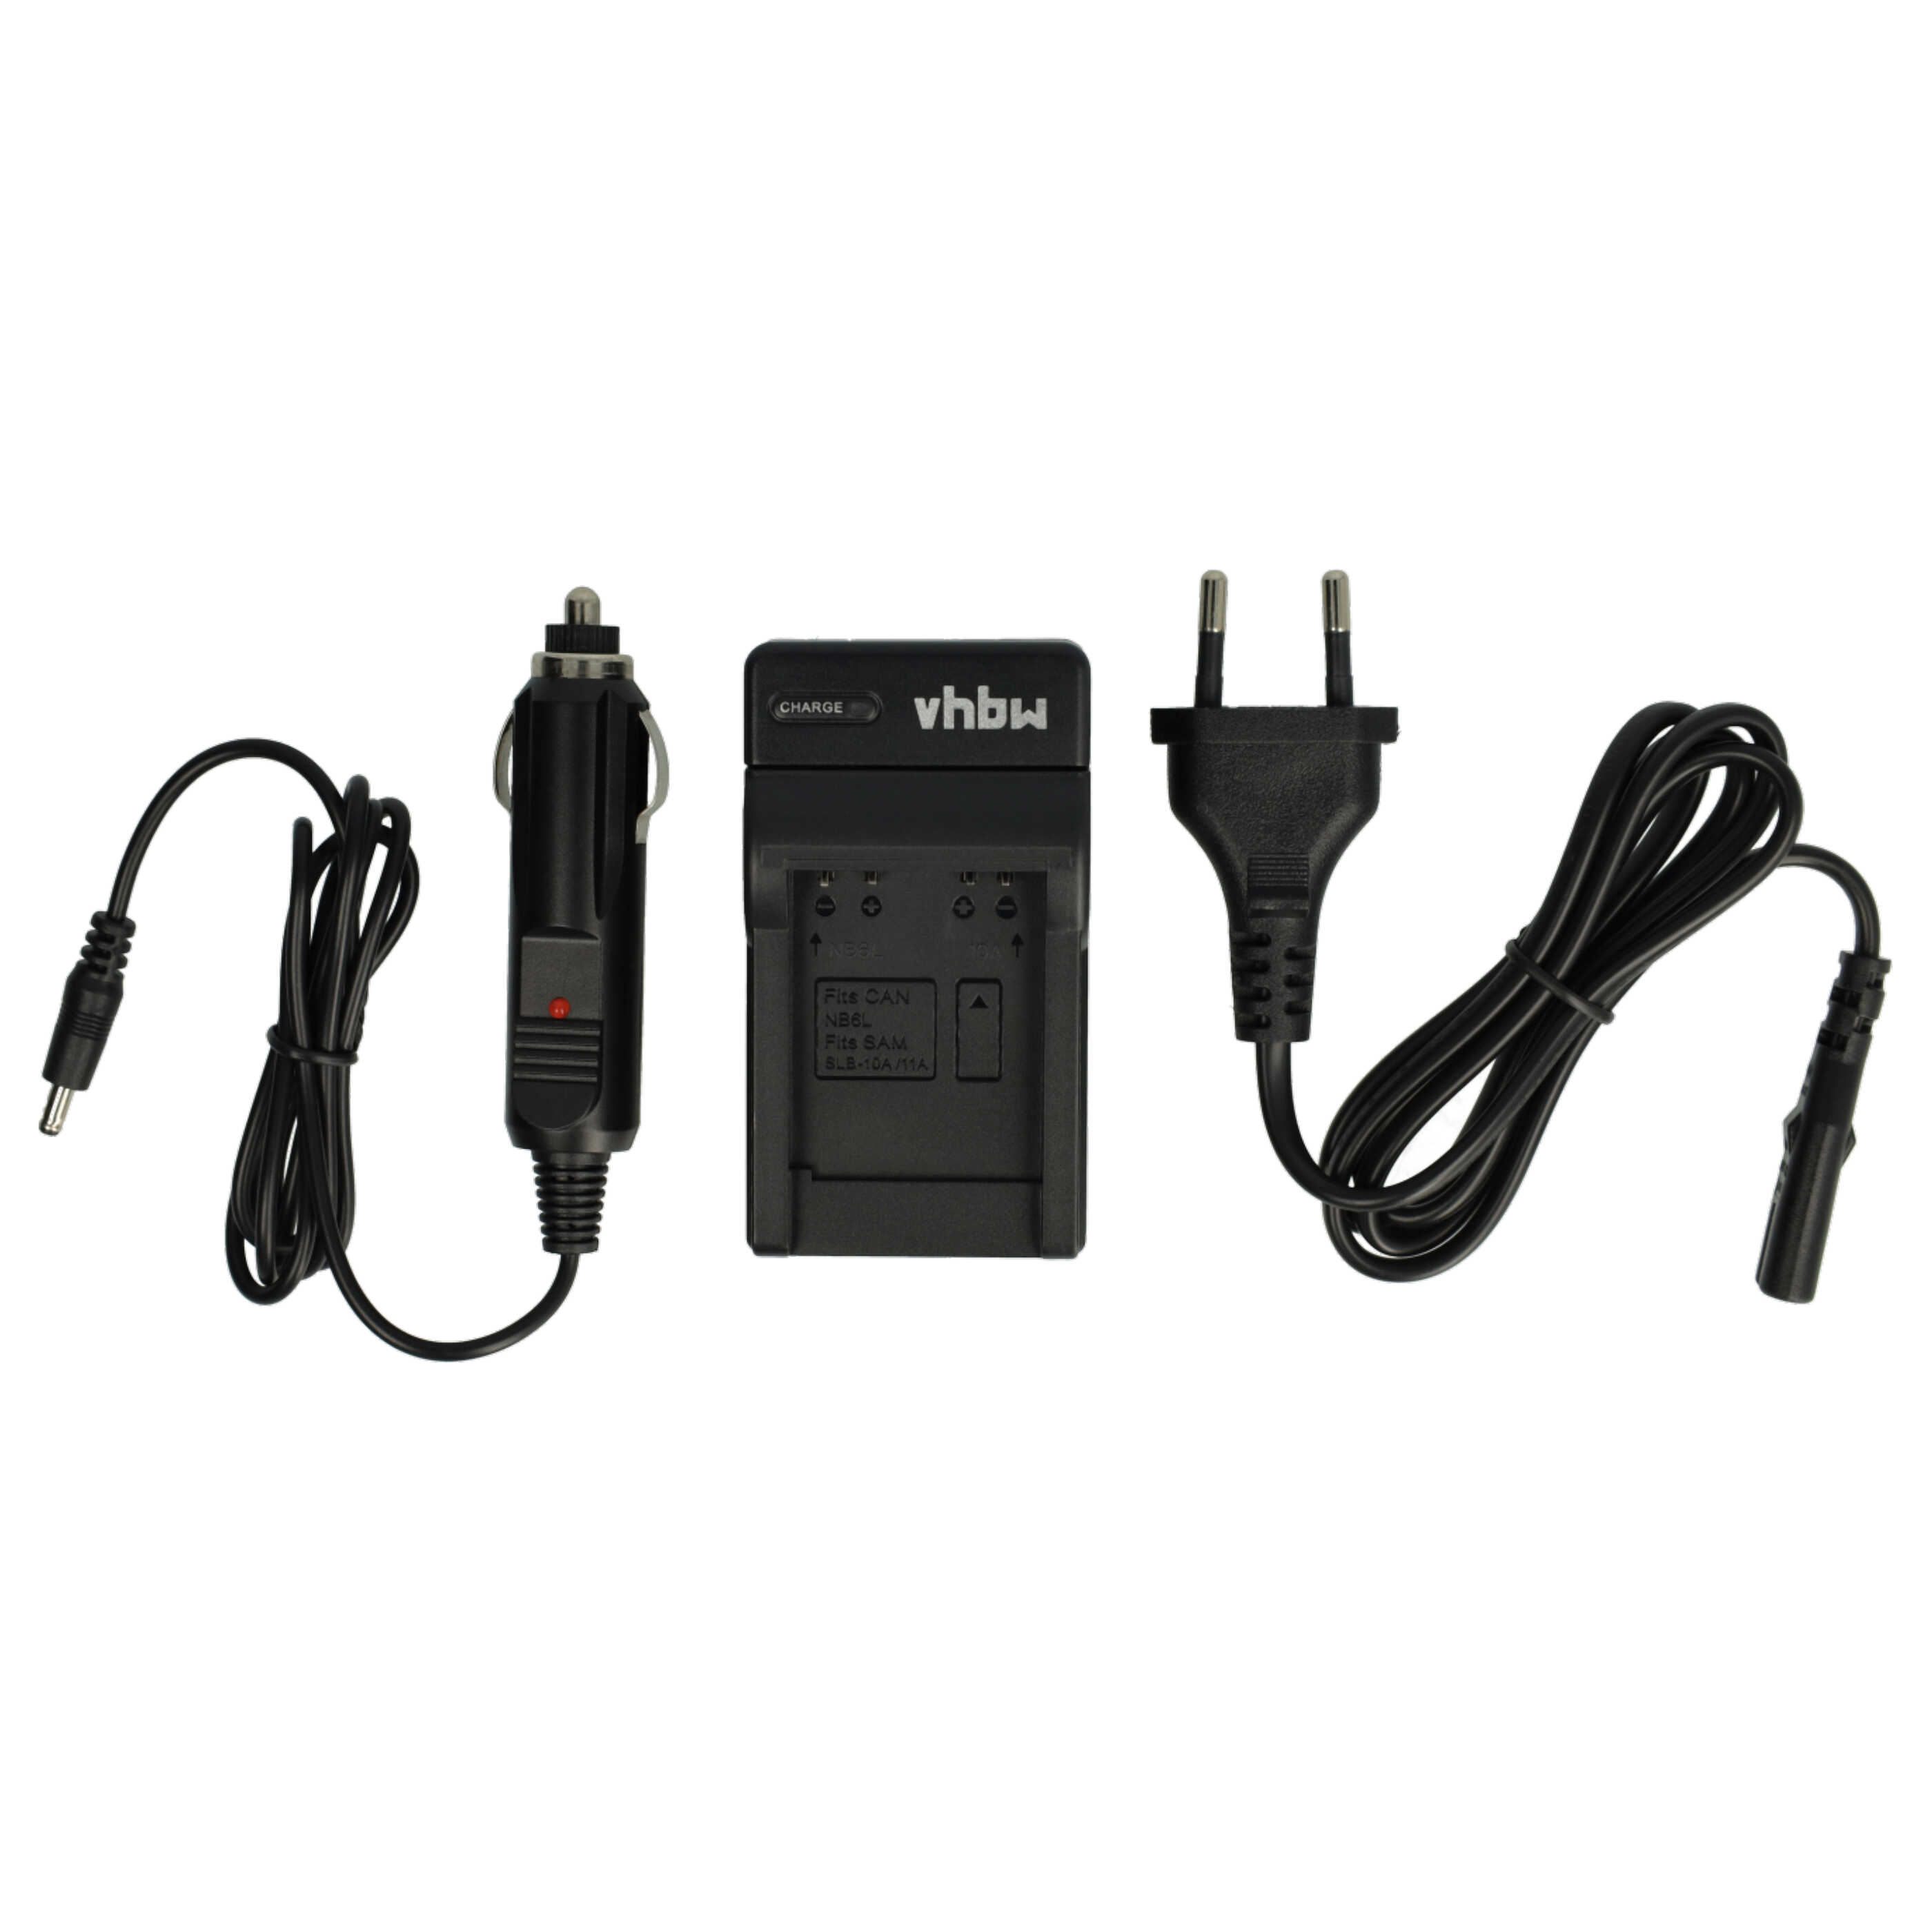 Battery Charger suitable for Camileo X150 Camera etc. - 0.6 A, 4.2 V